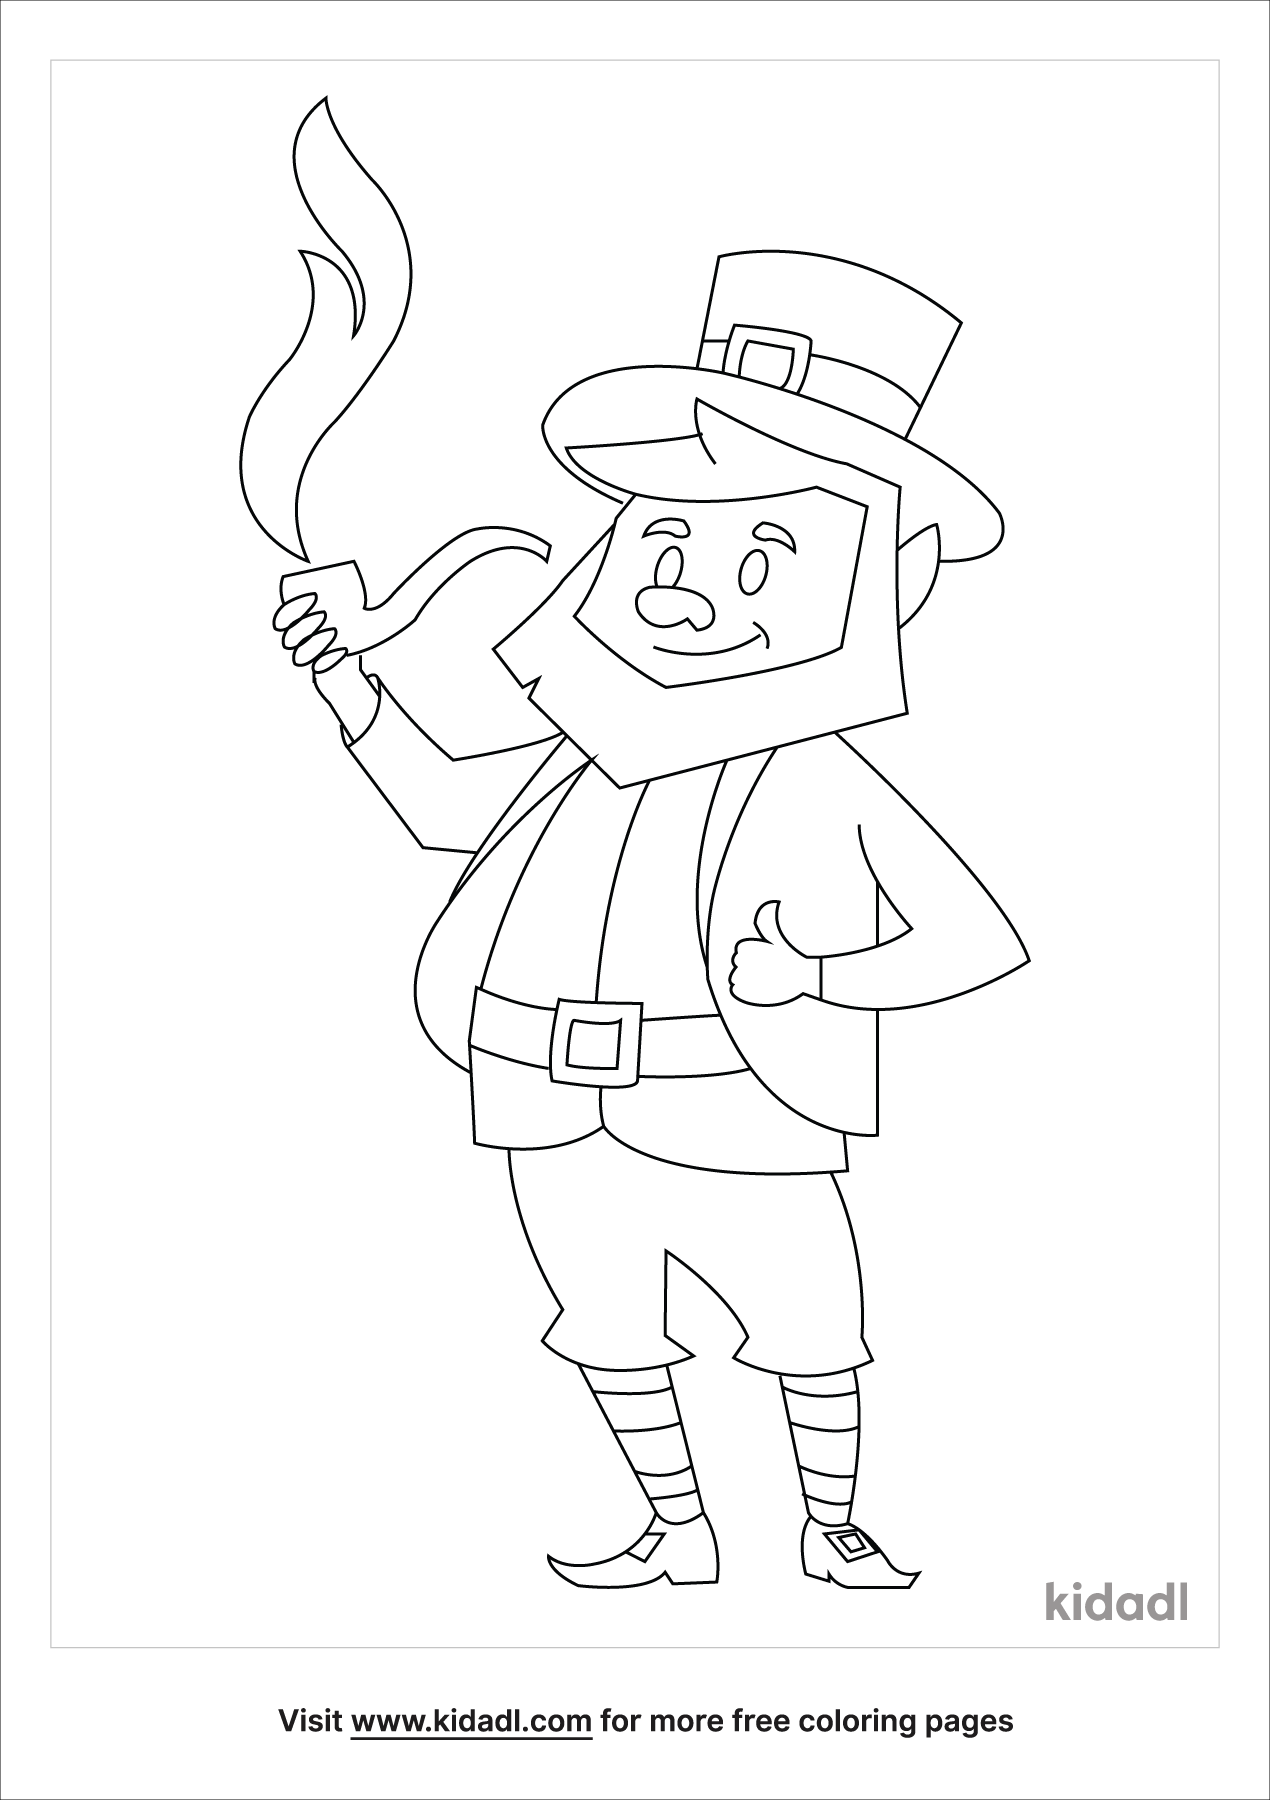 Gnome Smoking A Pipe Coloring Pages | Free Fairytales & Stories Coloring  Pages | Kidadl